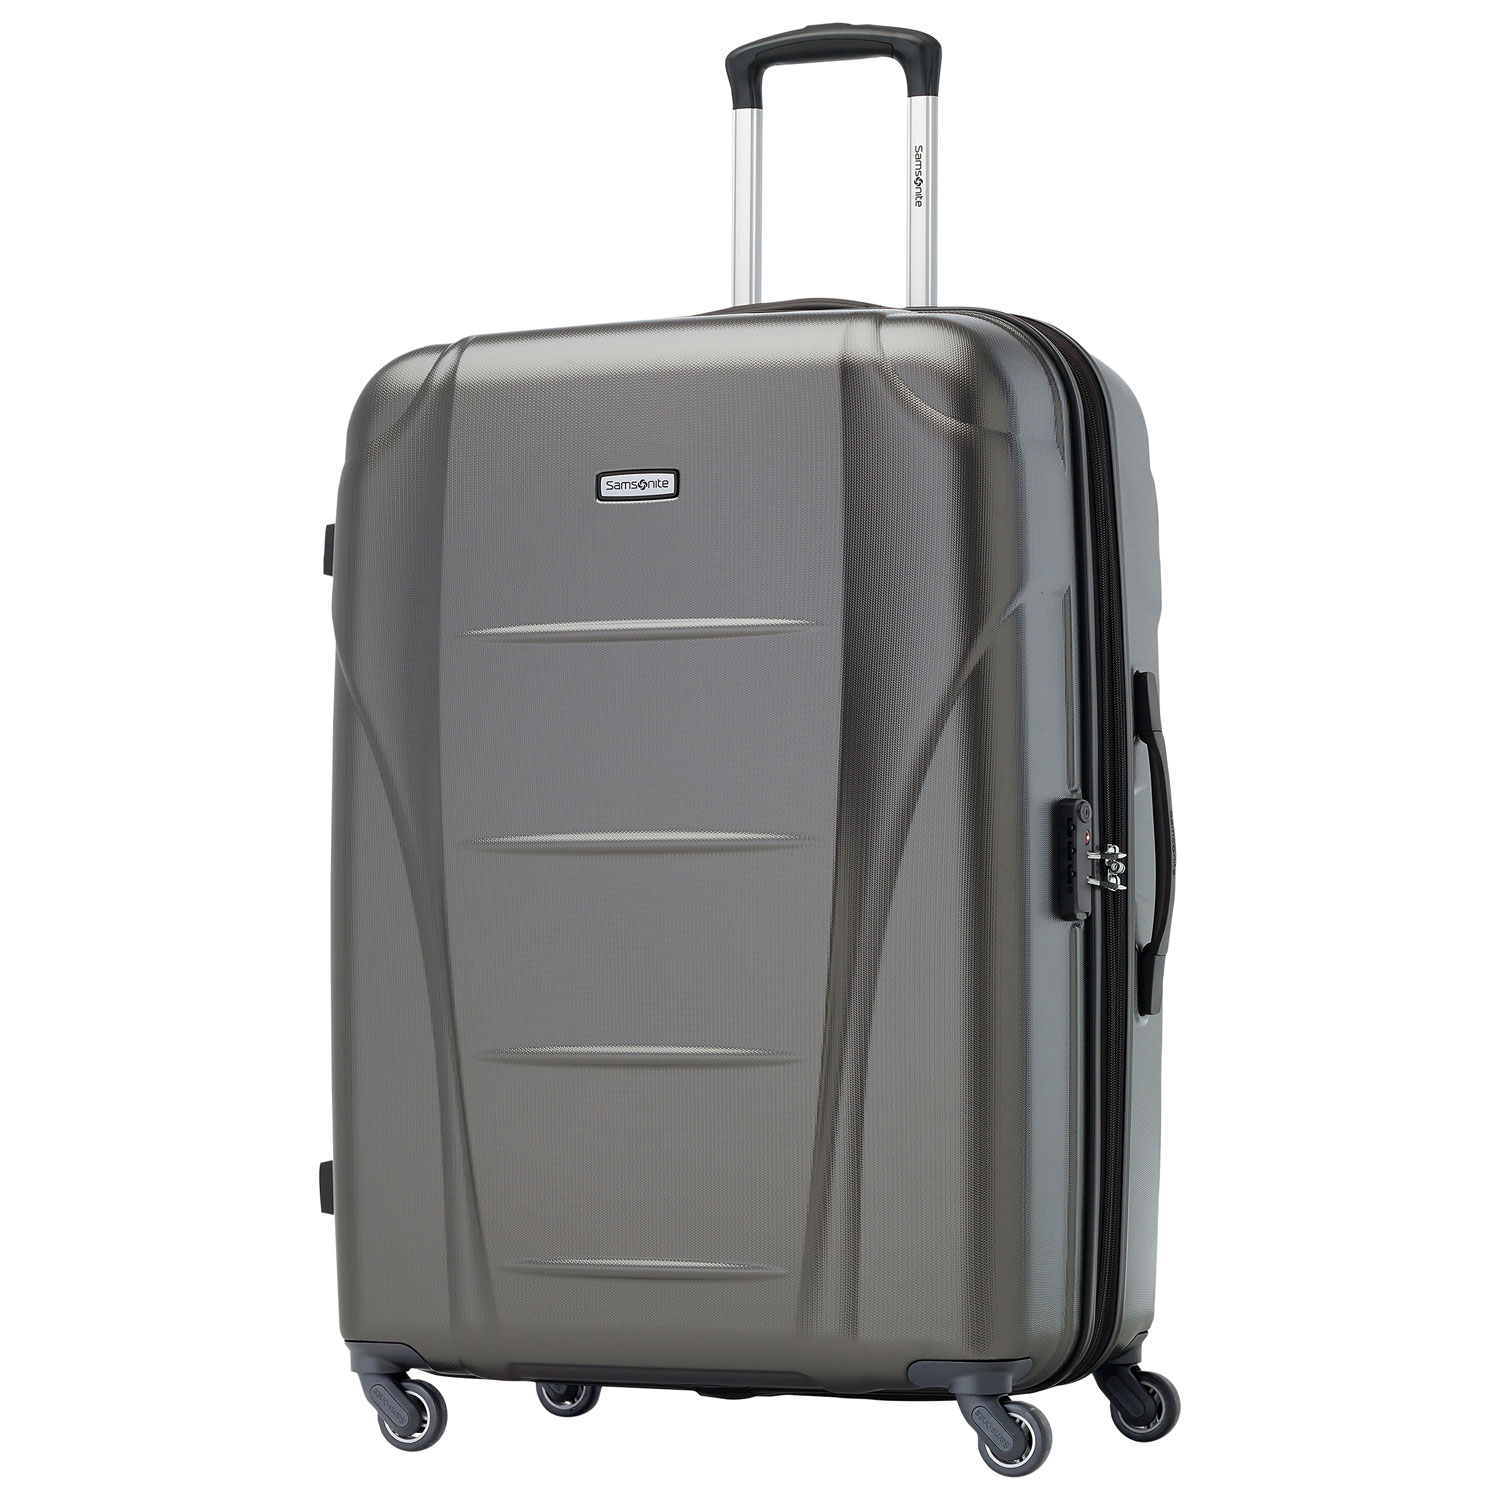 Samsonite Winfield NXT 27.5" Hard Side Expandable Luggage - Charcoal